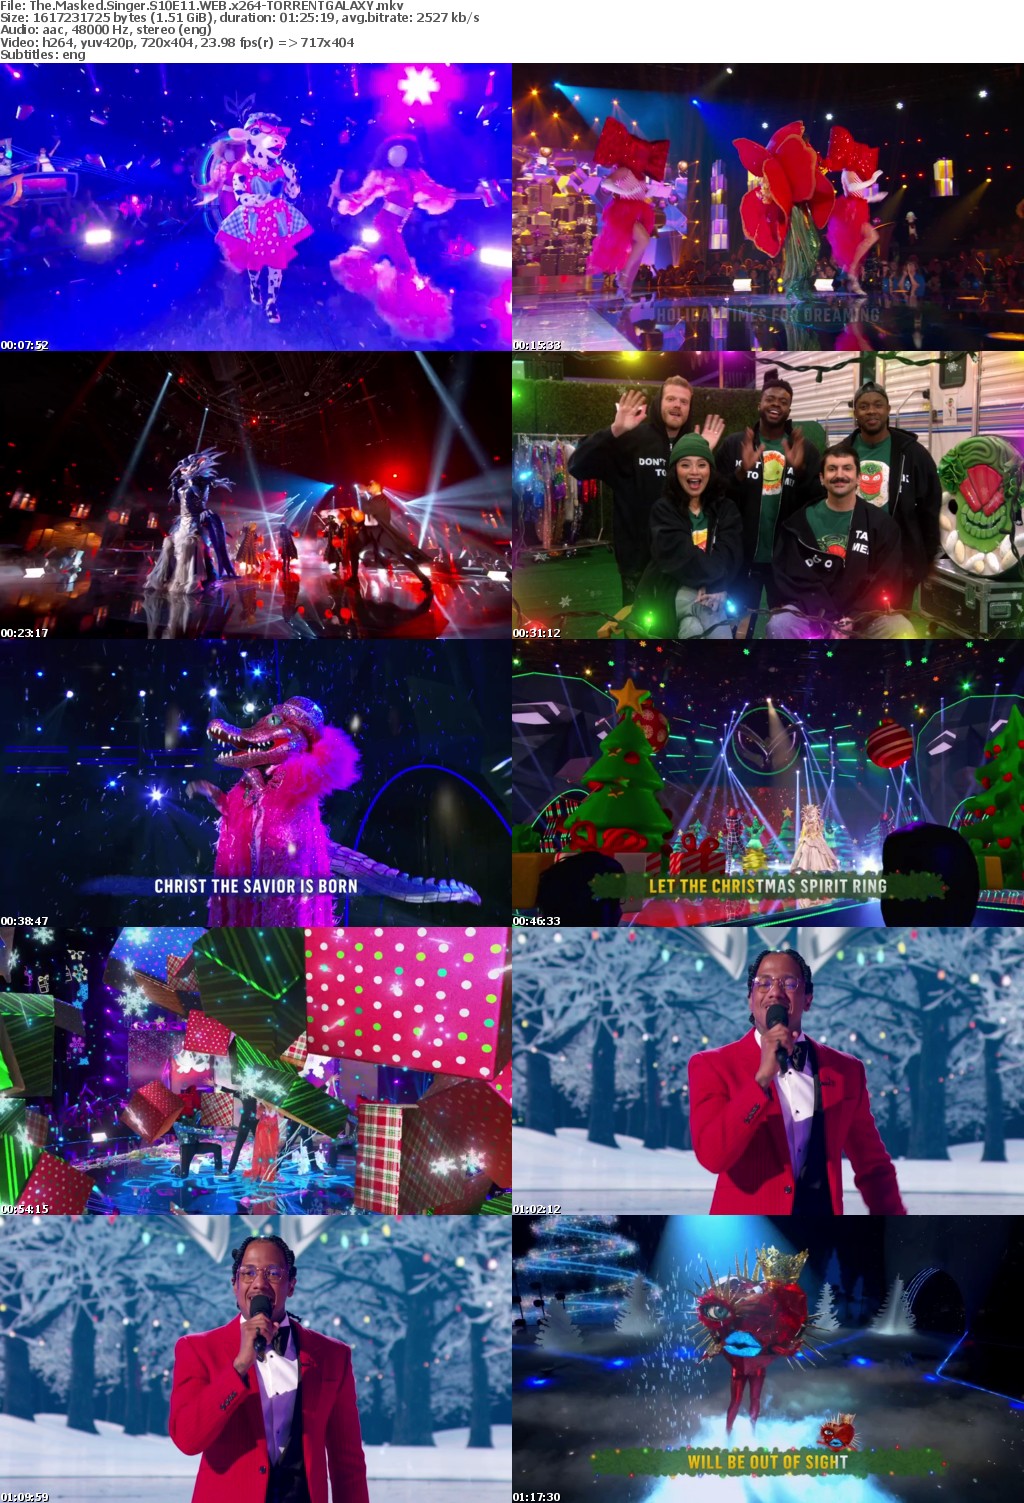 The Masked Singer S10E11 WEB x264-GALAXY